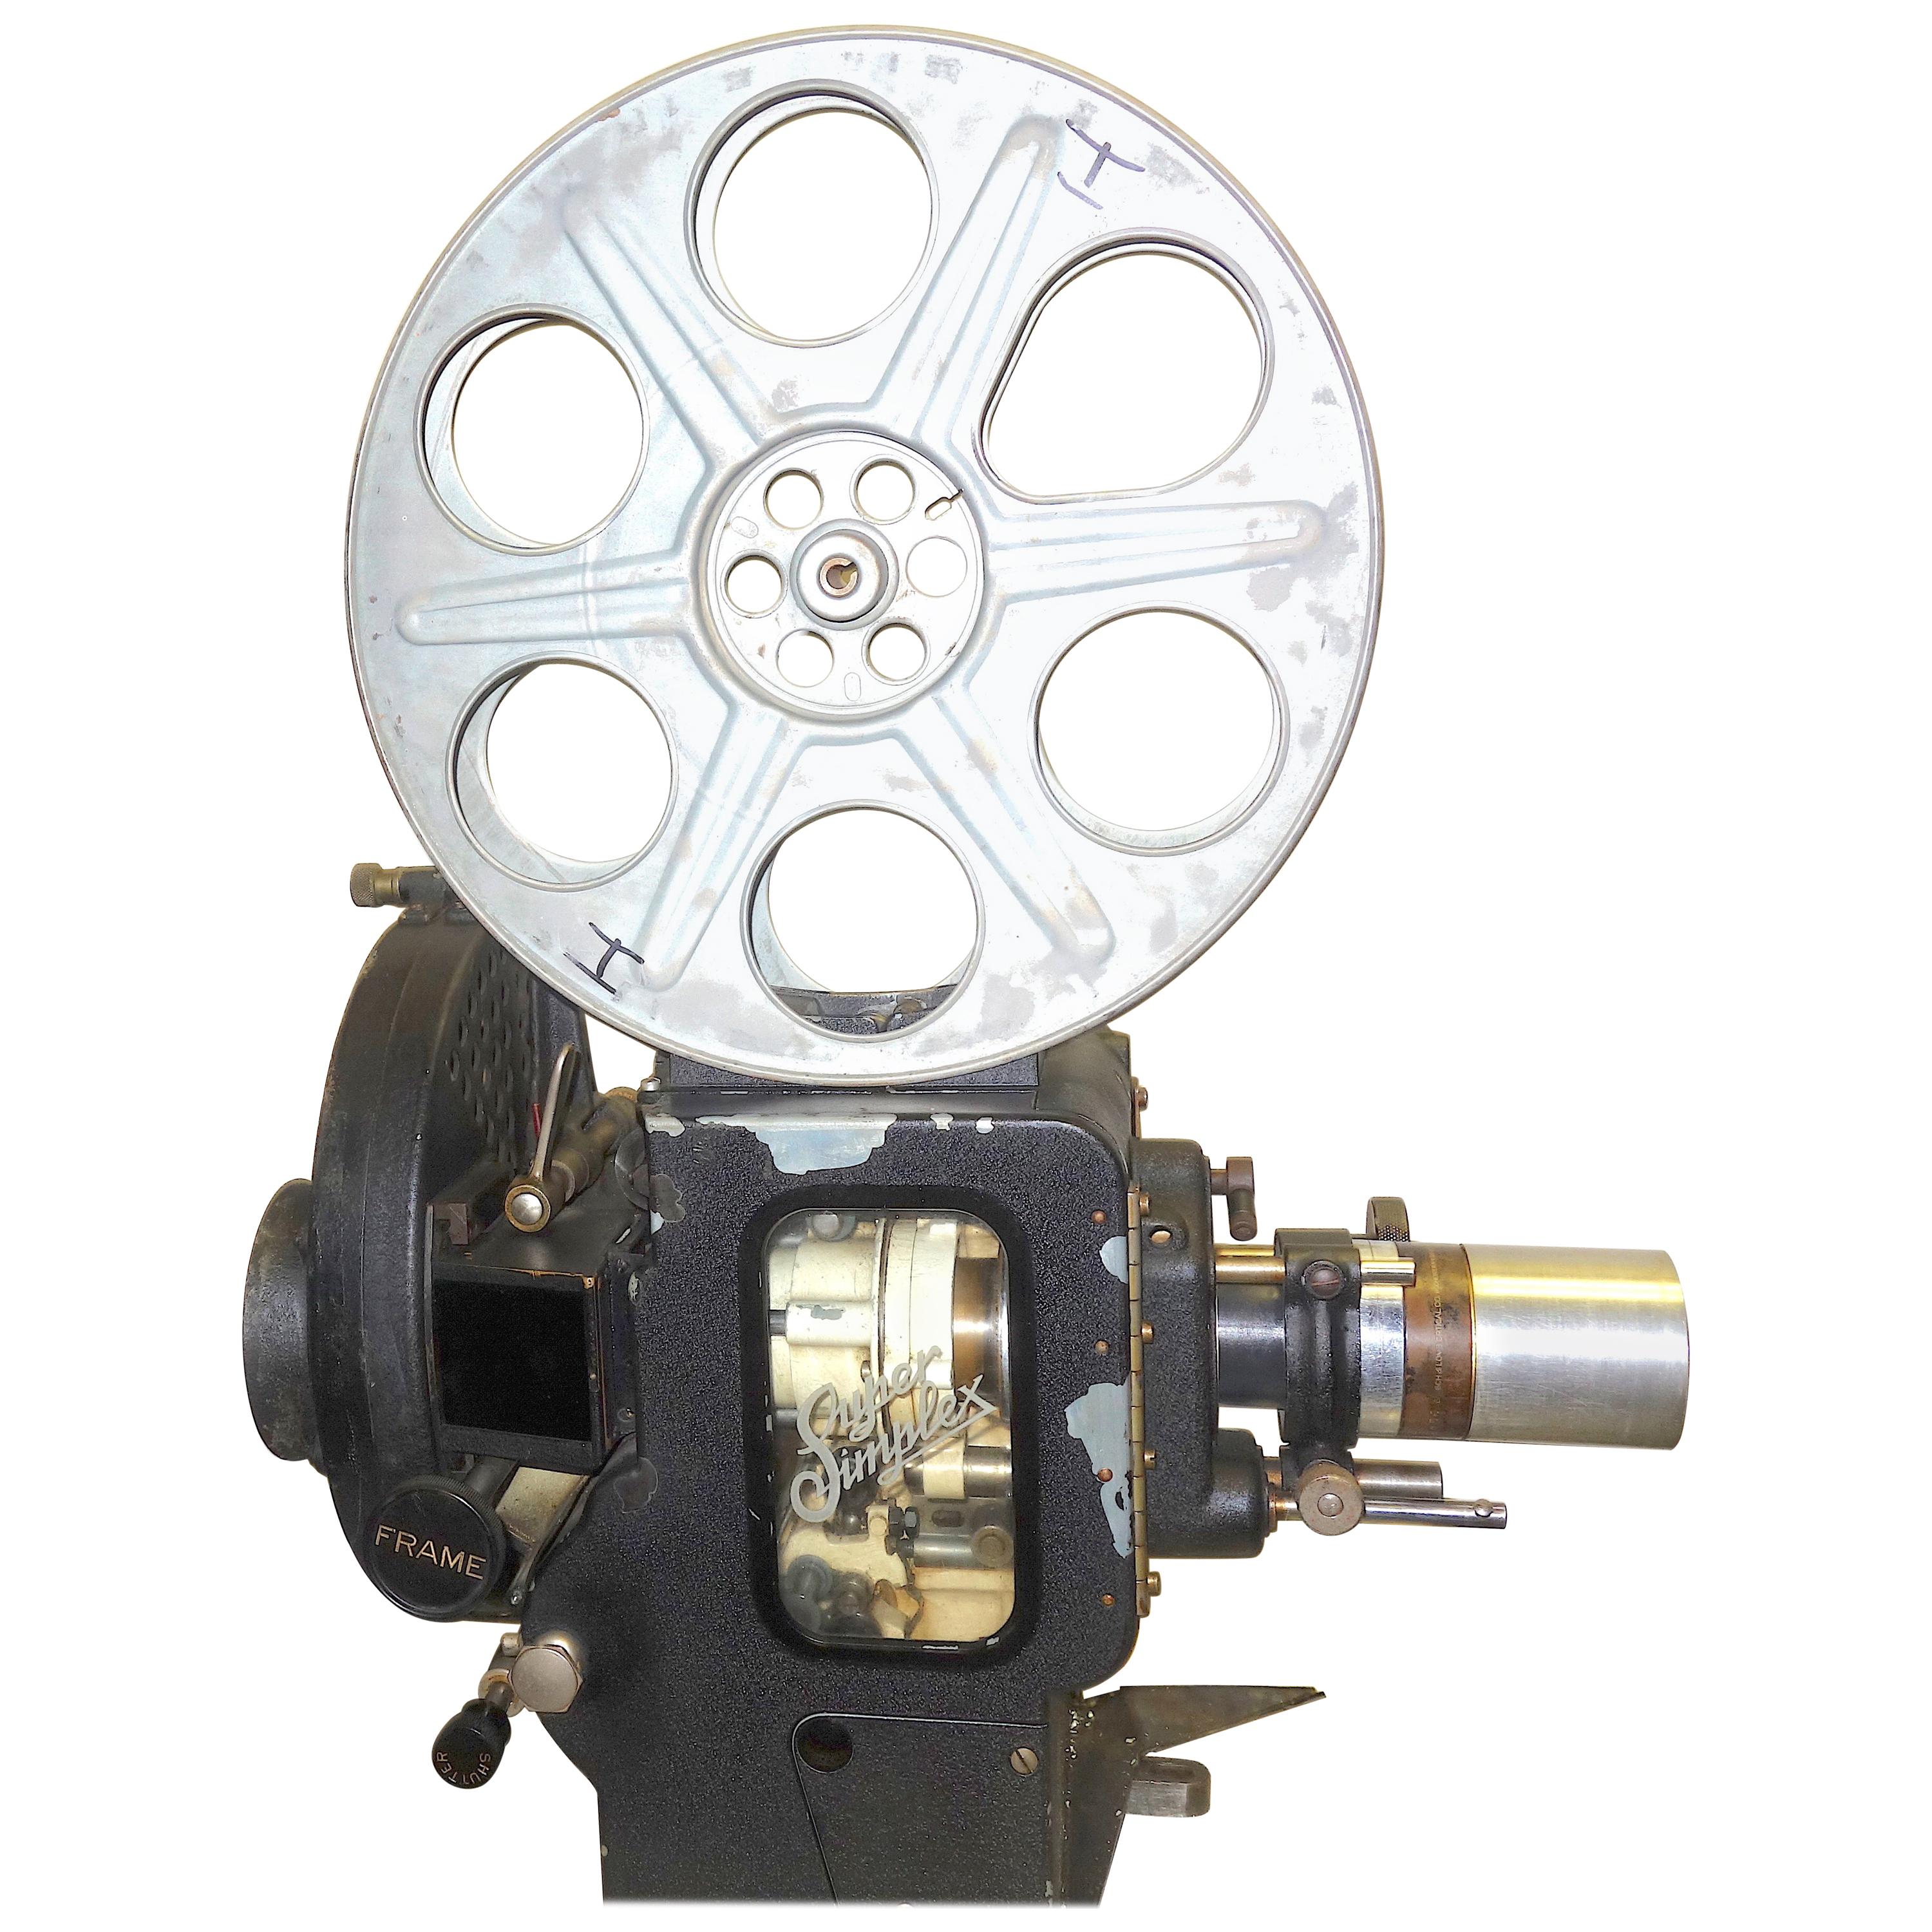 Motion Picture 35mm Theatre Projector 1922 Design, Complete Head Hollywood Relic For Sale